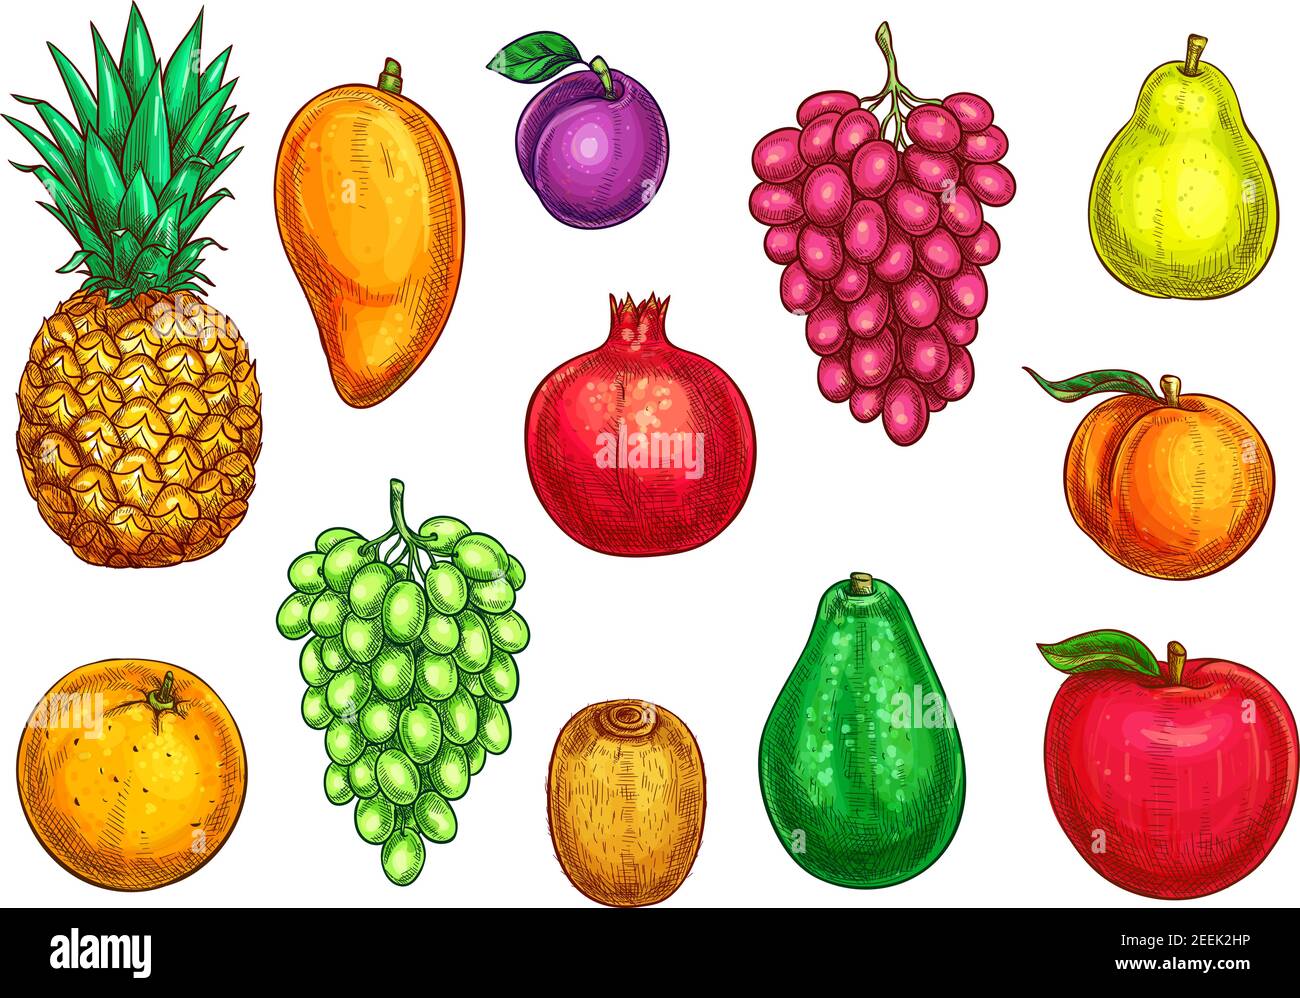 Fruits icons apple, apricot or pear and peach, tropical avocado or mango and exotic pineapple, garnet or pomegranate and kiwi, orange or tangerine cit Stock Vector